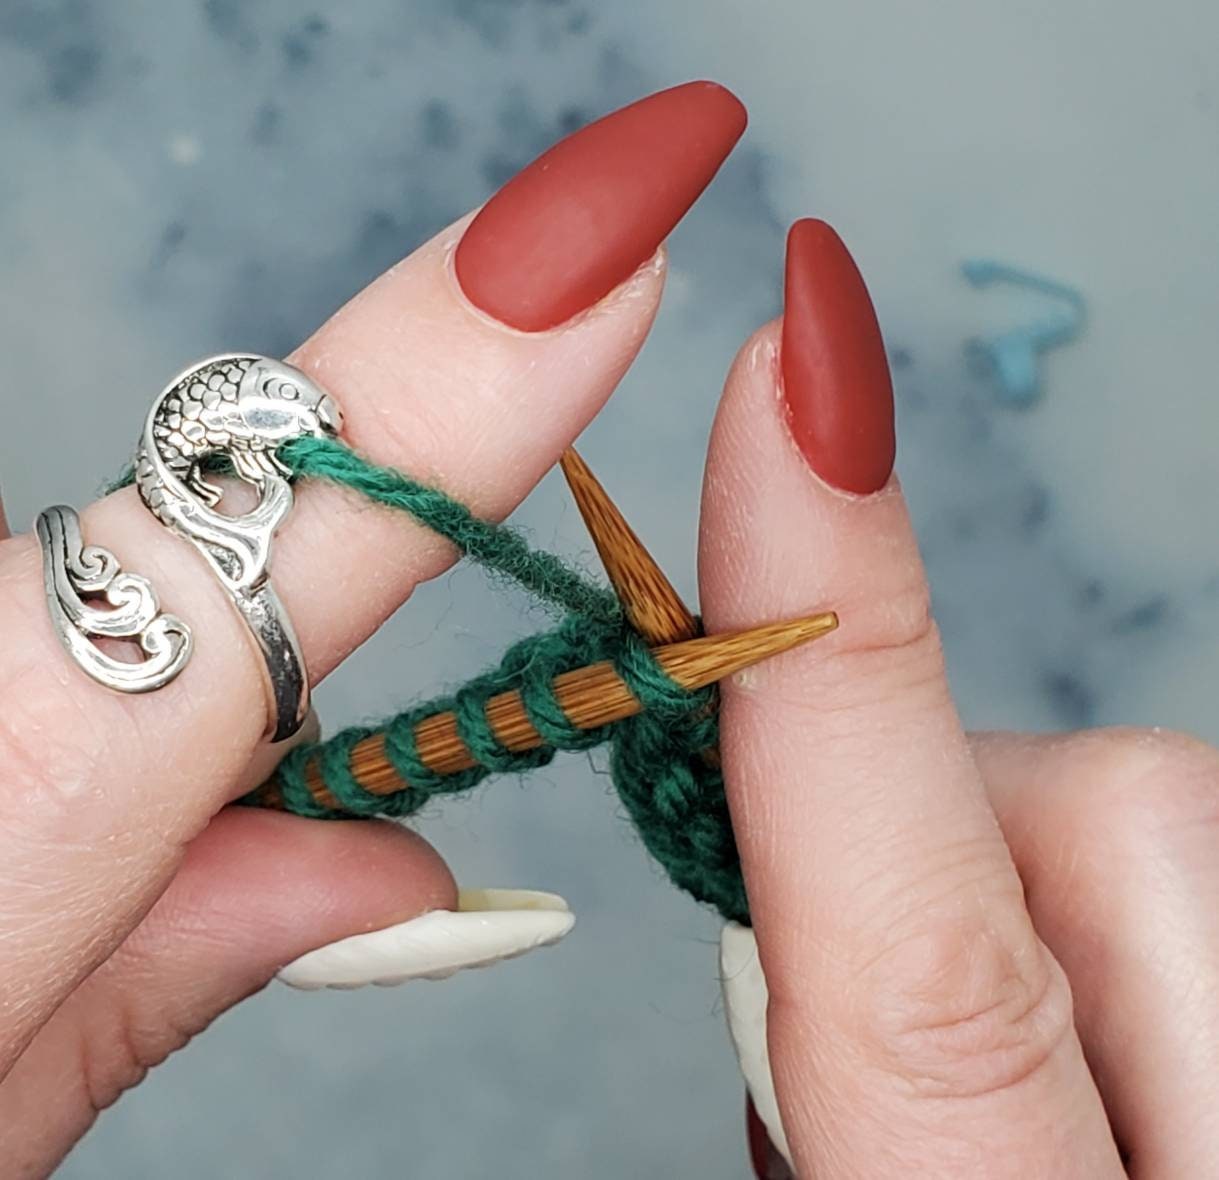 Adjustable Knitting and Crochet Ring, Yarn Ring, Tension Ring, Colorwork  Ring, Yarn Guide, Adjustable Ring, Peacock Ring, Fox Ring, Notions. 